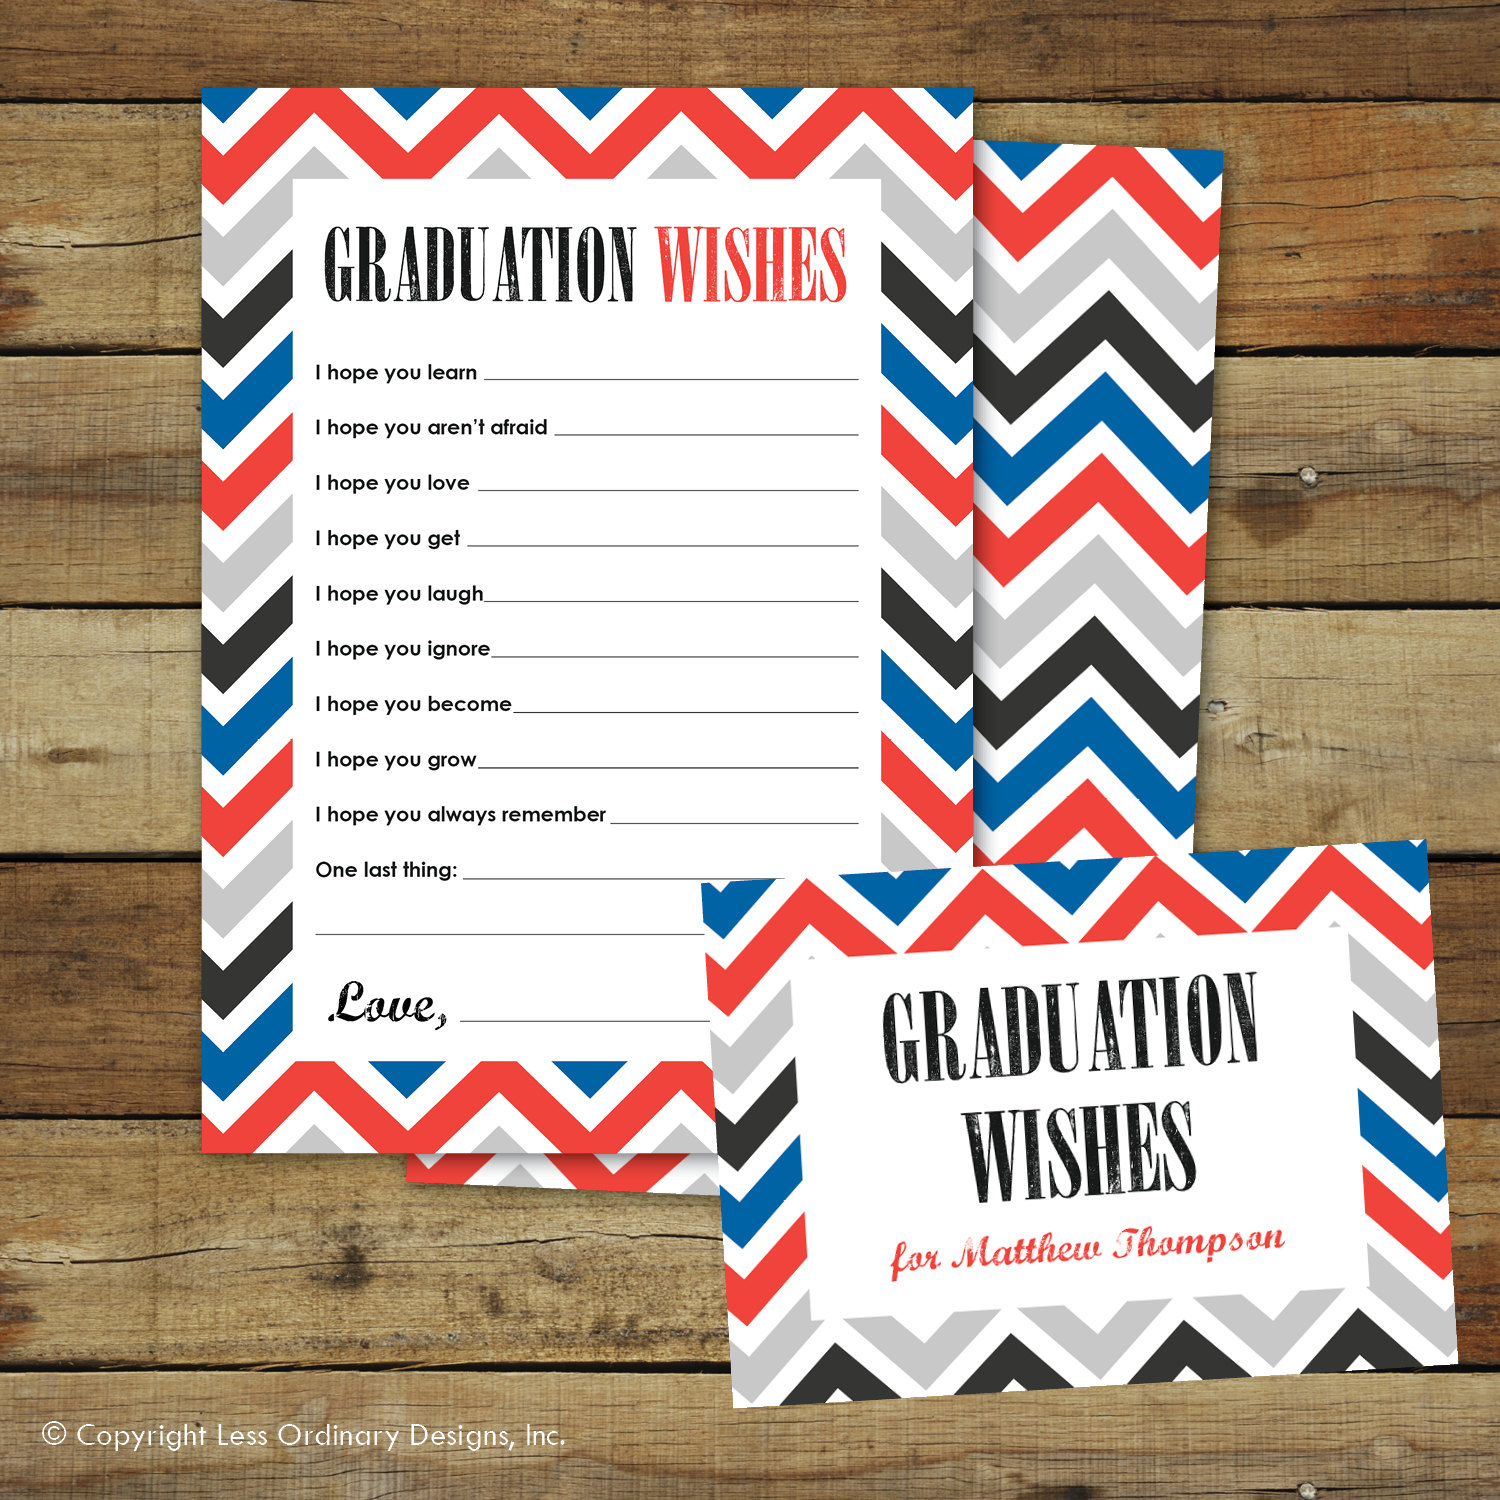 Graduation wishes advice cards printable instant download